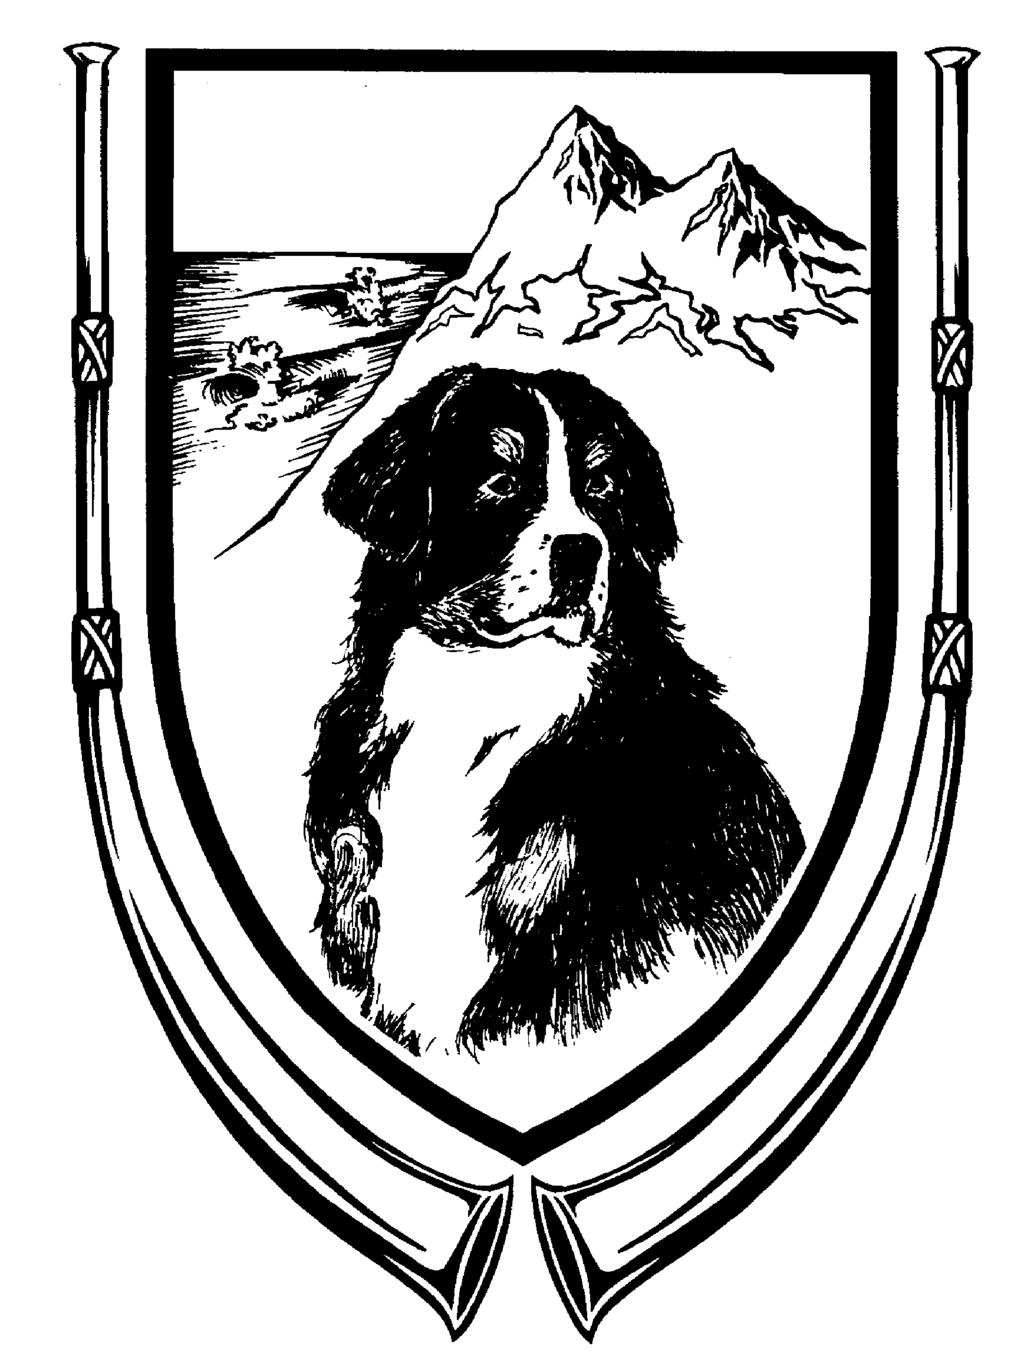 Premium List The Bernese Mountain Dog Club of Southern California welcomes spectators at this event!! Plan to come and spend the day relaxing with great company.